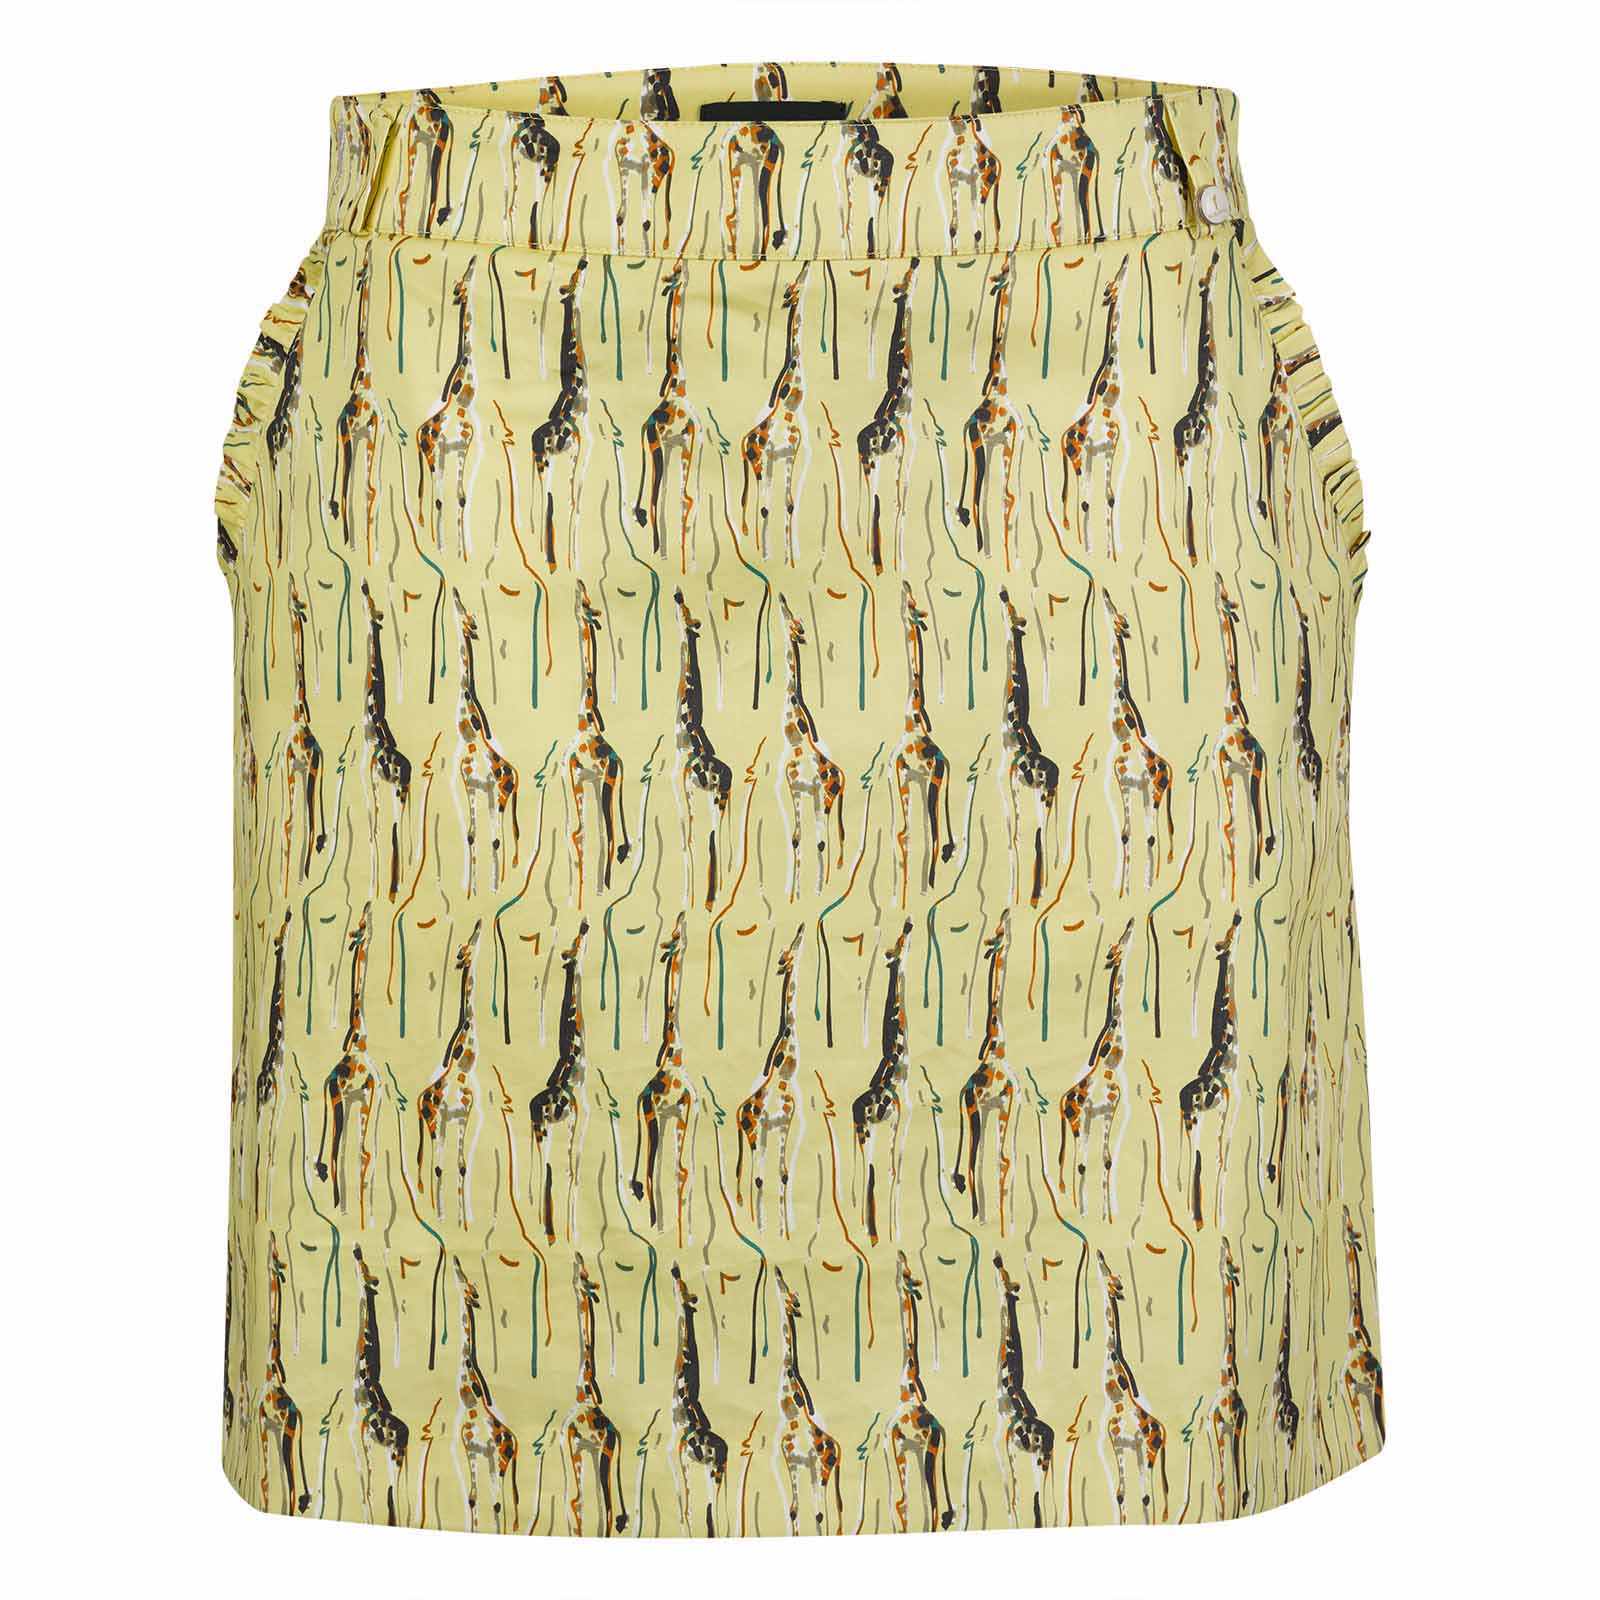 Ladies' golf skort with extra stretch comfort in medium length made from a cotton blend